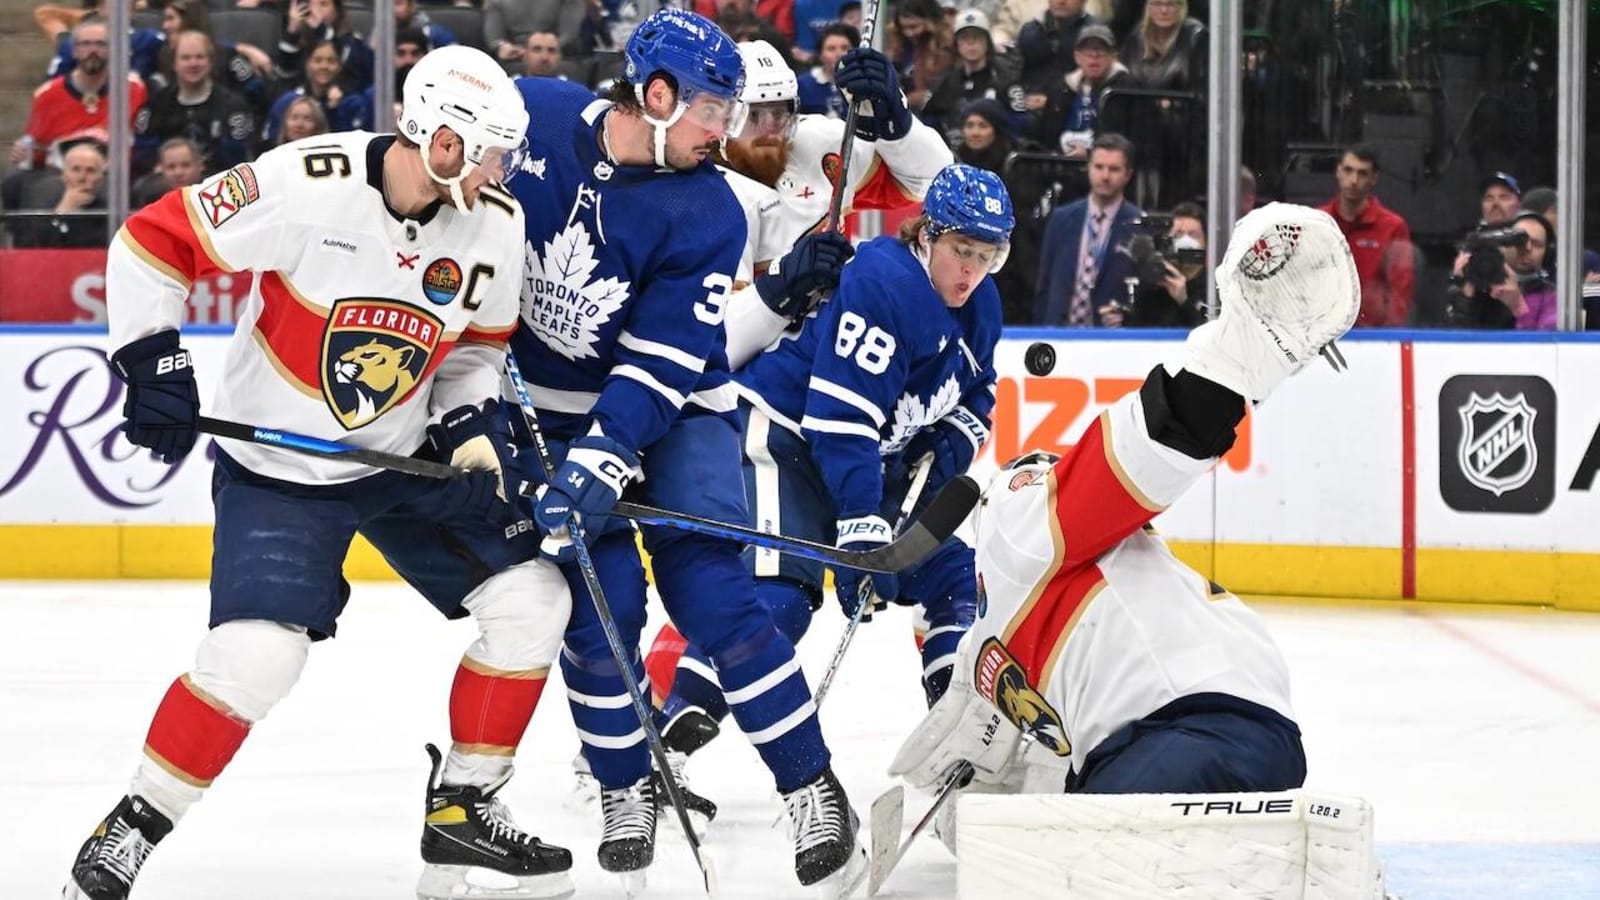 Maple Leafs will face the Panthers in a second round, but don’t pop the champagne yet